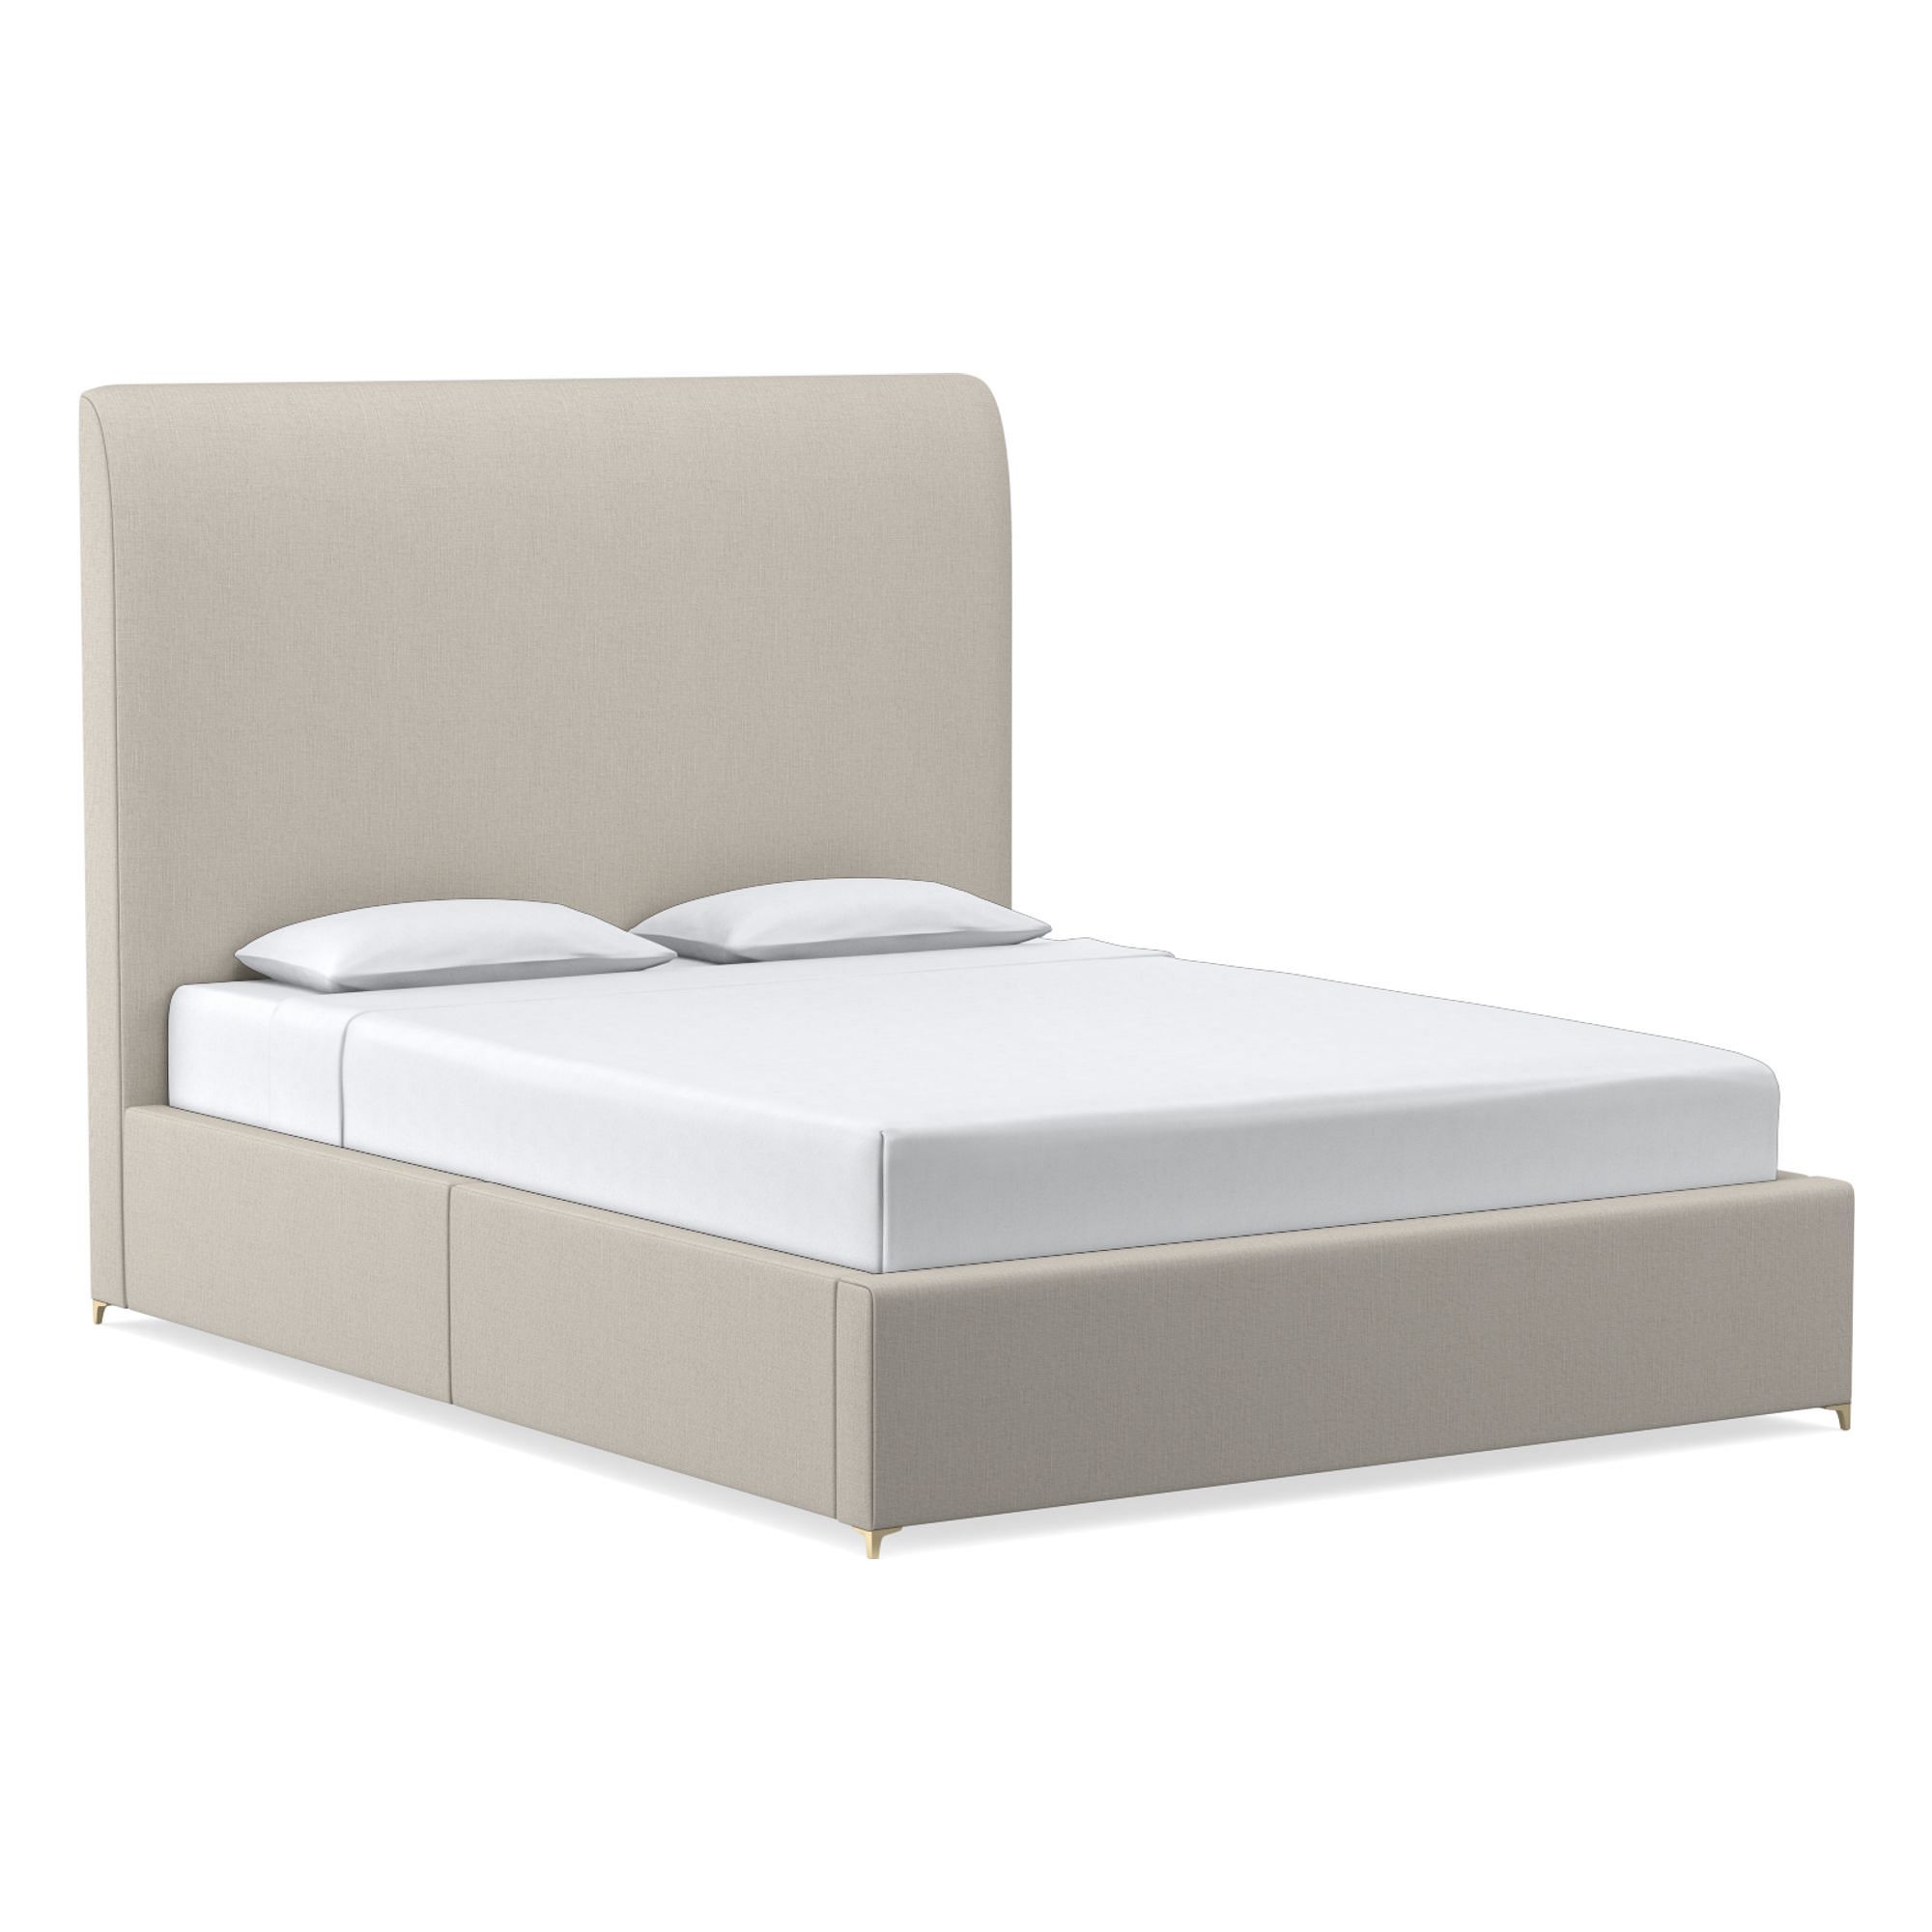 Andes Low Profile Bed | West Elm